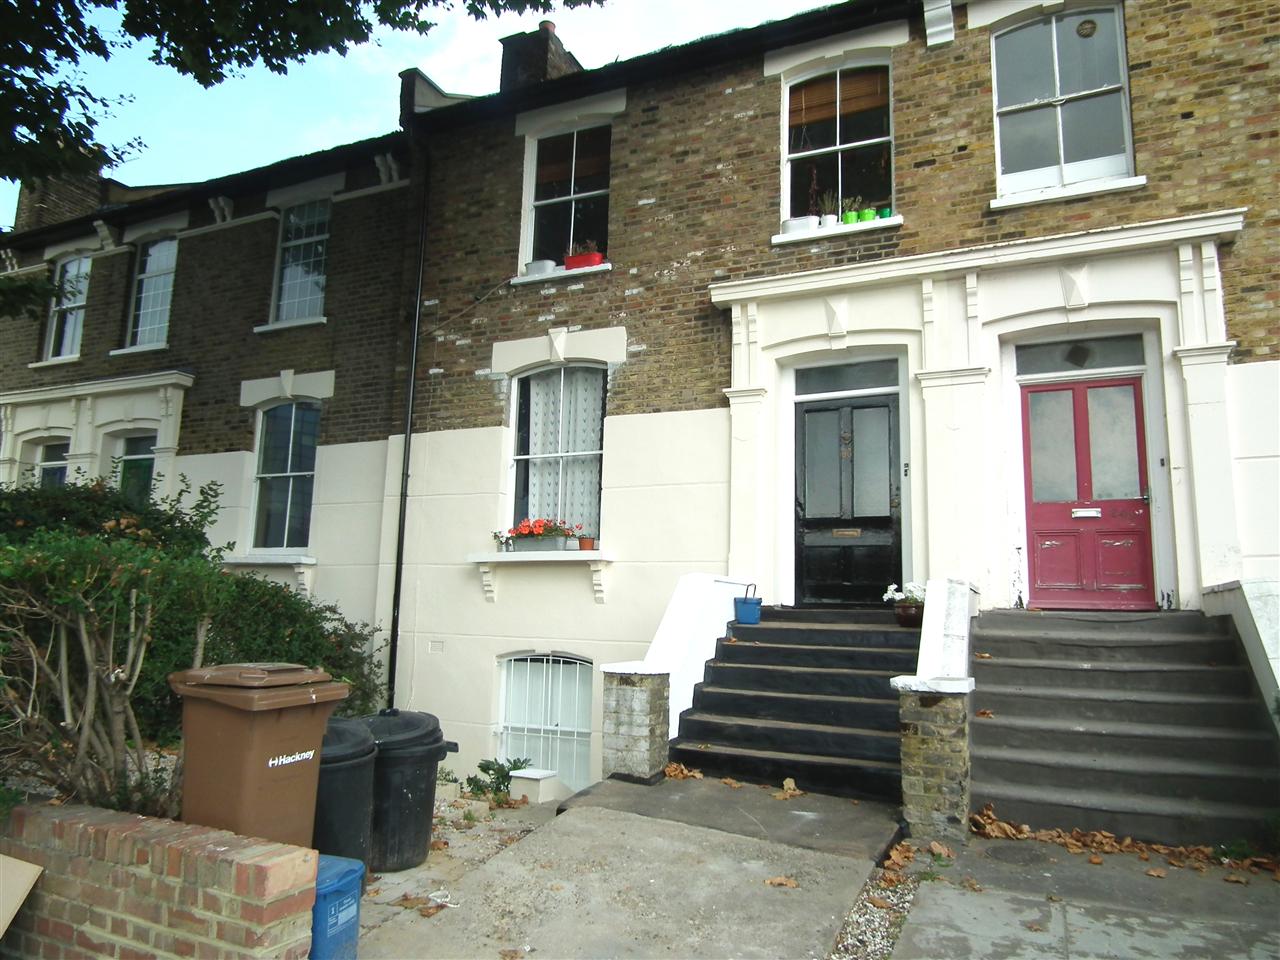 Located within walking distance of Kingsland High Street & Dalston/Kingsland Train Station (North London Line) is this delightful lower ground floor UNFURNISHED maisonette. The accommodation comprises of one large double and one small double bedroom, a central living space with separate fully ...